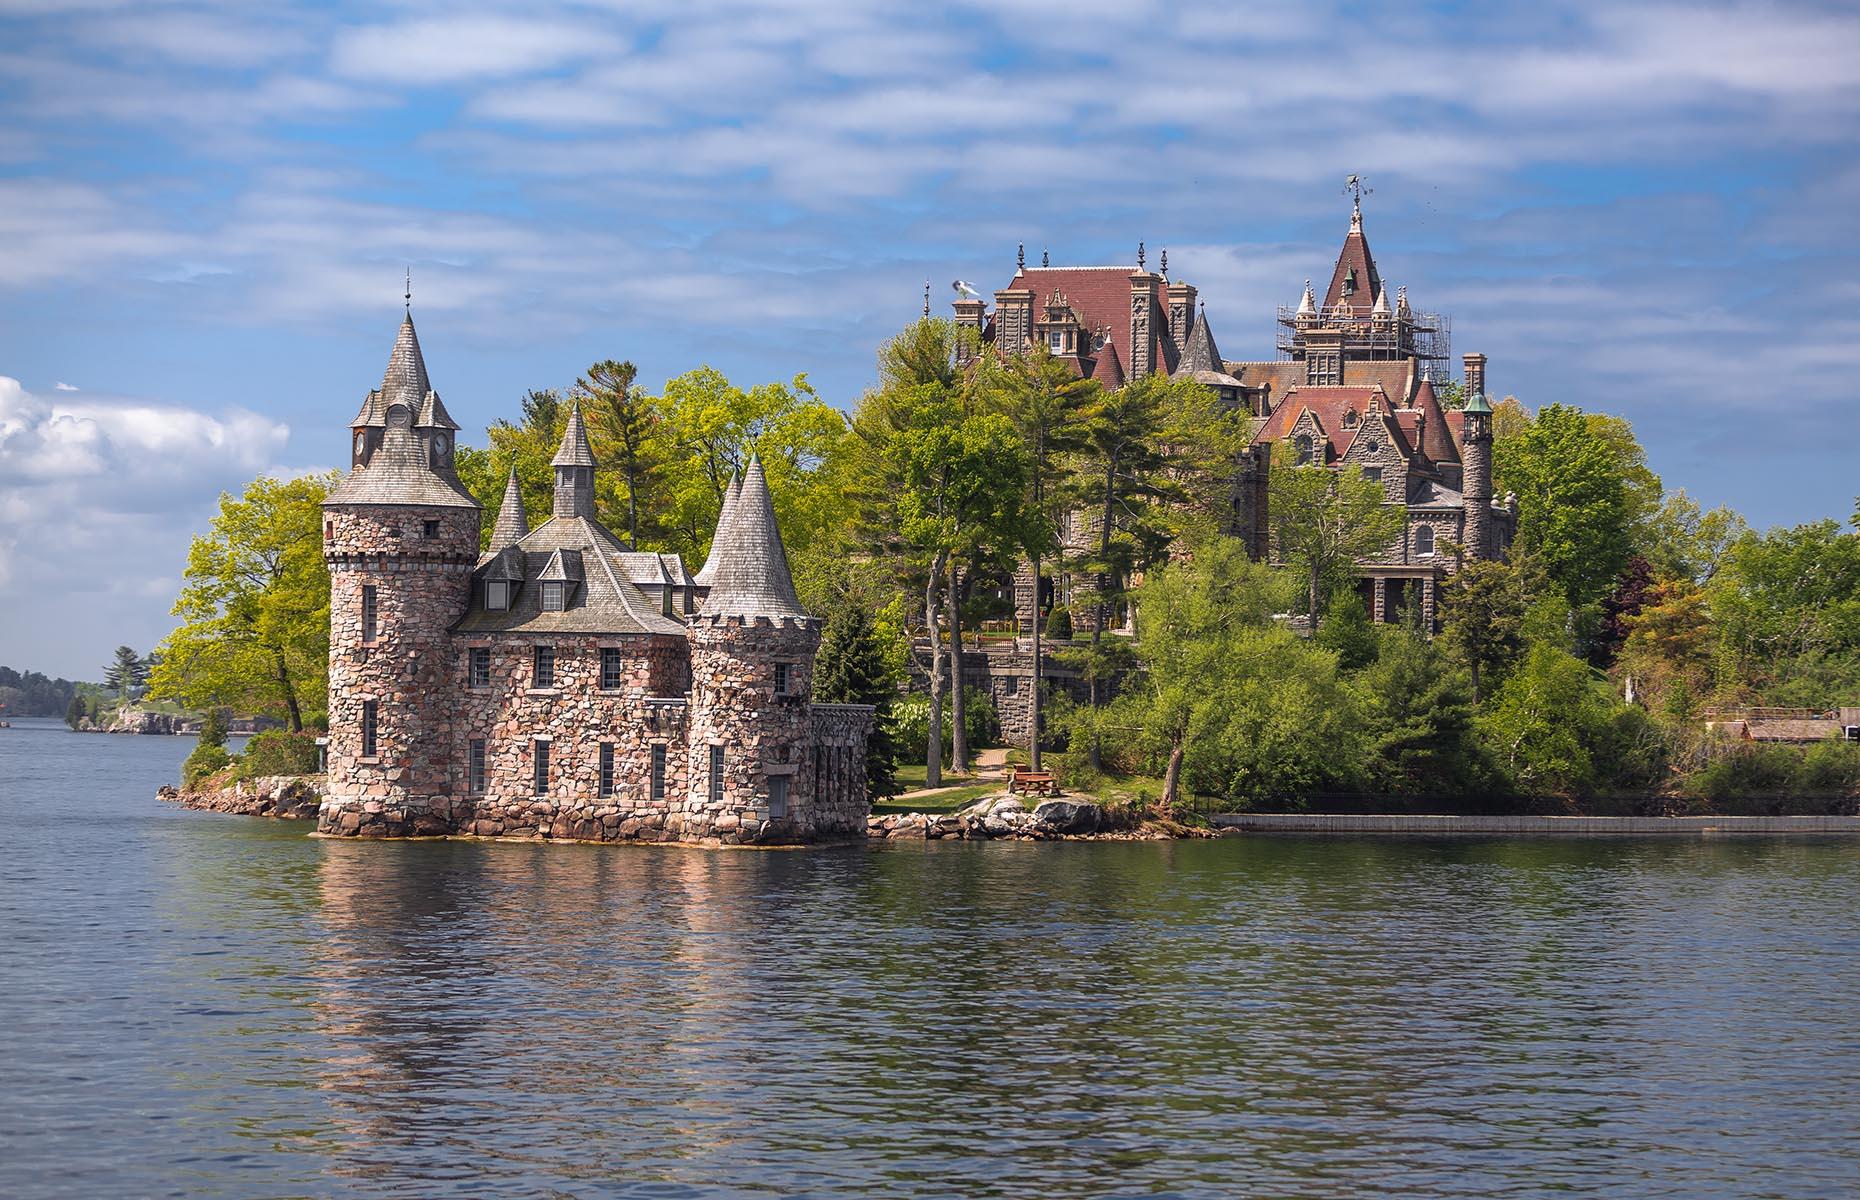 Named after its visionary – affluent hotelier George C. Boldt – Boldt Castle was intended to be a private estate. The castle was a labor of love – literally – as Bolt built the sprawling confection as a show of love for his wife, Louise, who sadly passed away during its construction. Upon her death, bereft Boldt abandoned the project and it stood unfinished on Heart Island until the 1970s.